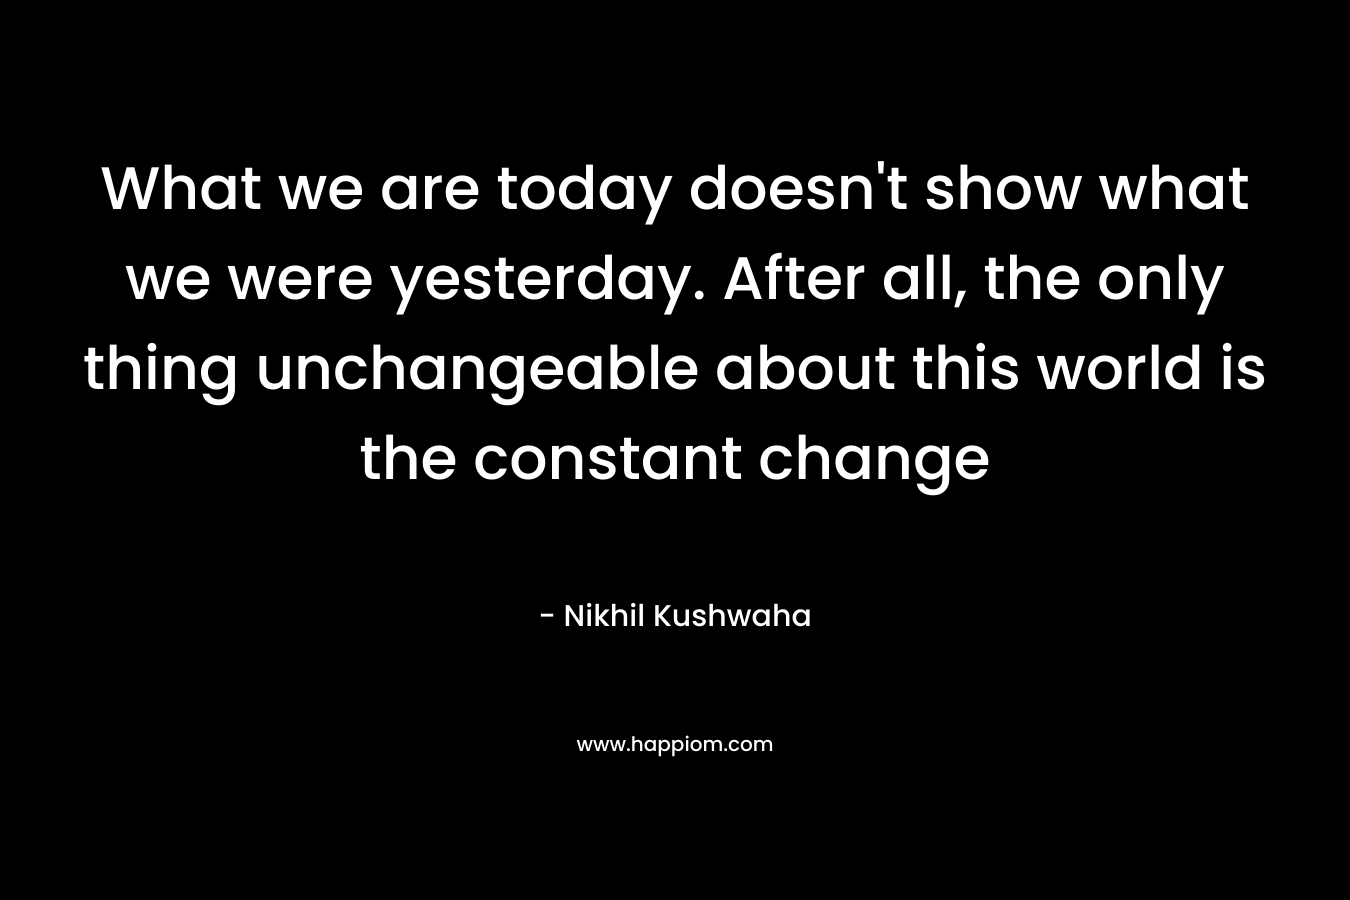 What we are today doesn’t show what we were yesterday. After all, the only thing unchangeable about this world is the constant change – Nikhil Kushwaha